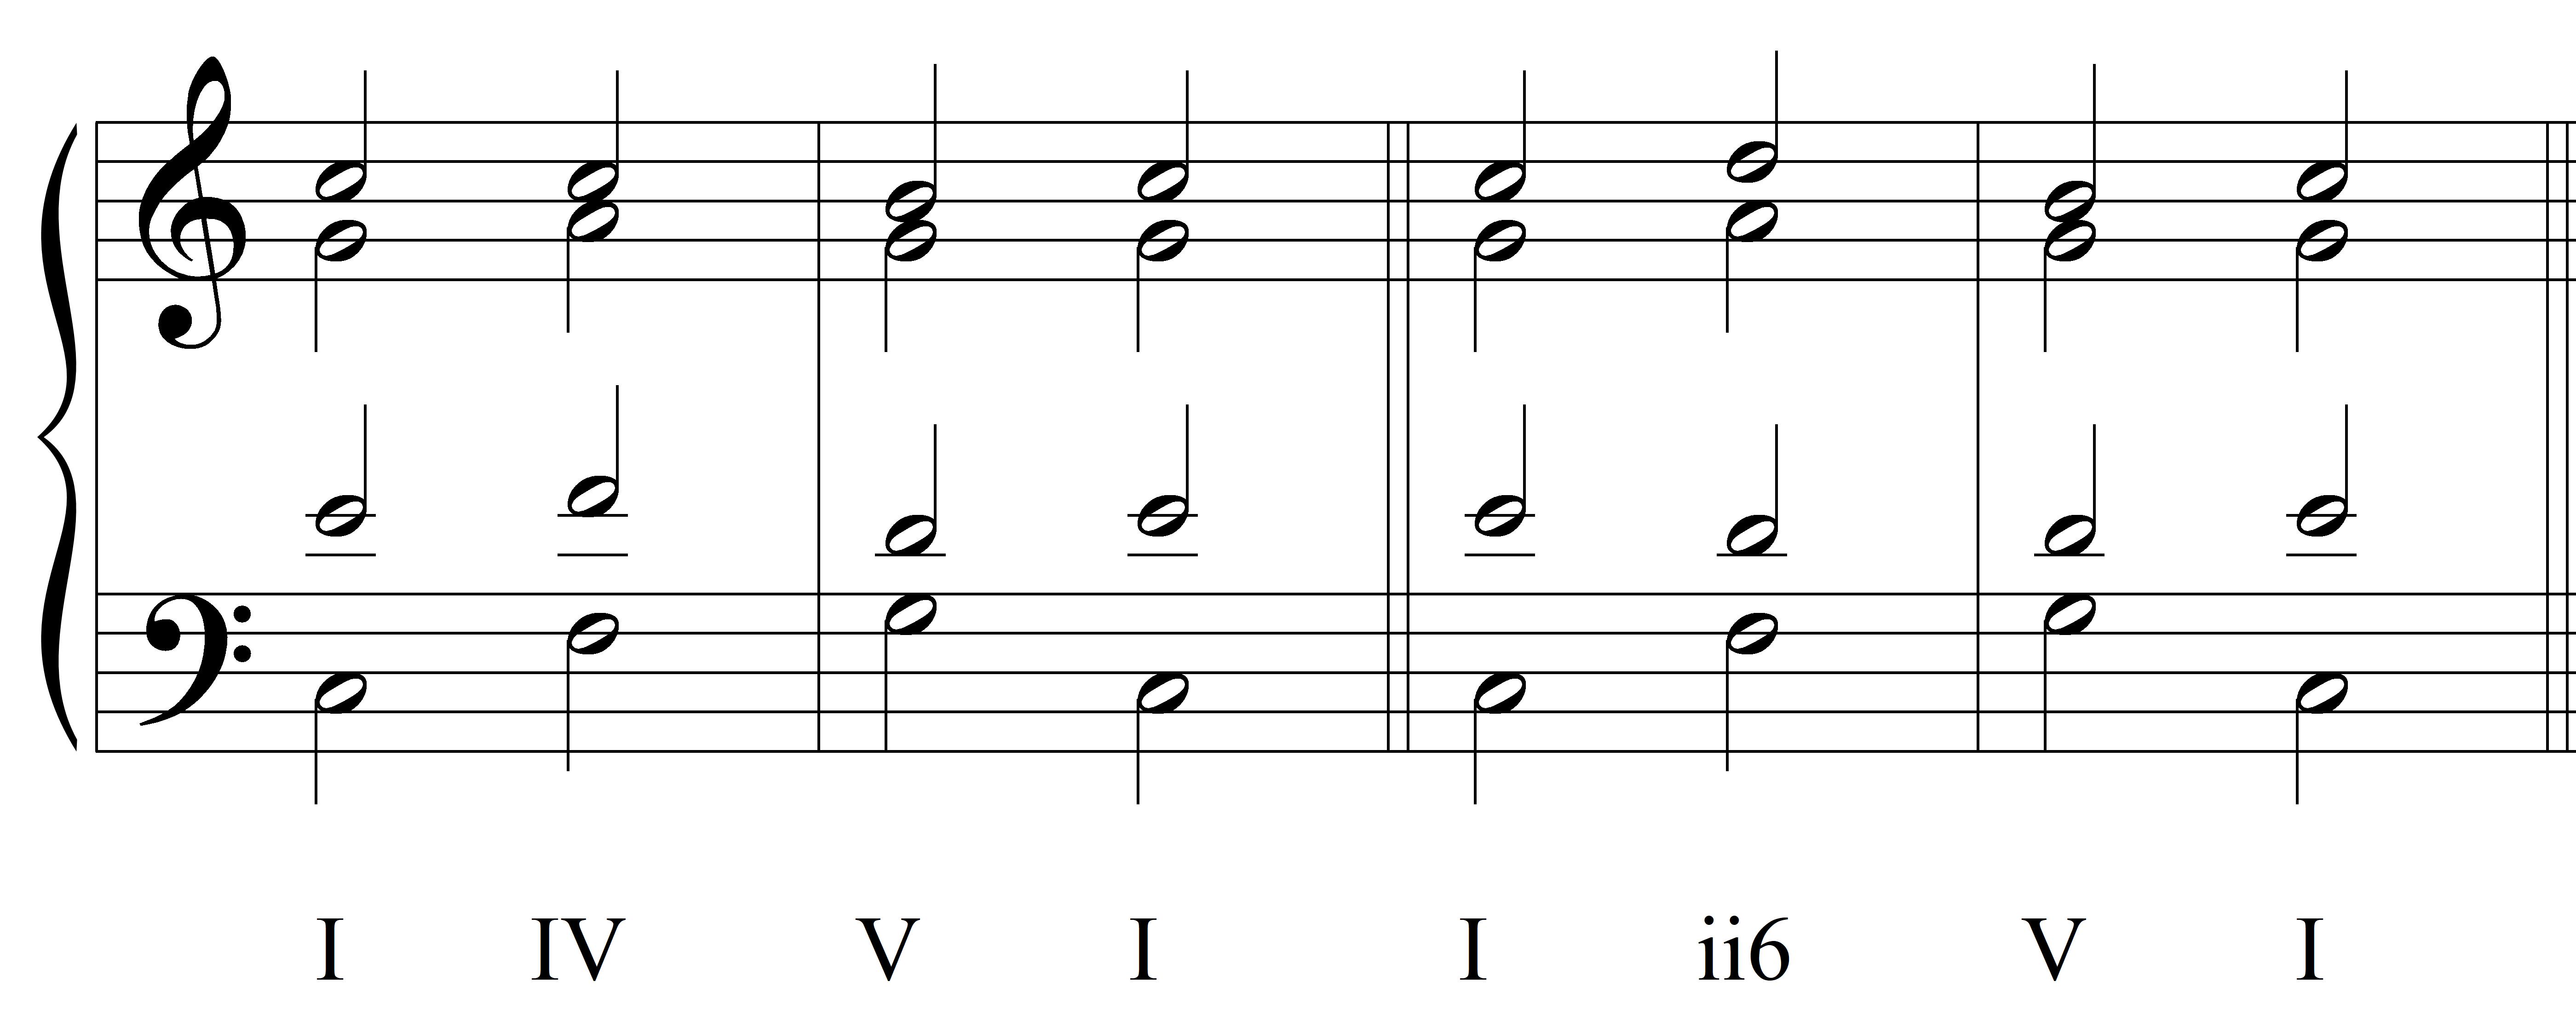 Integrated Aural Skills Ear Training Common Chord Progressions In Context